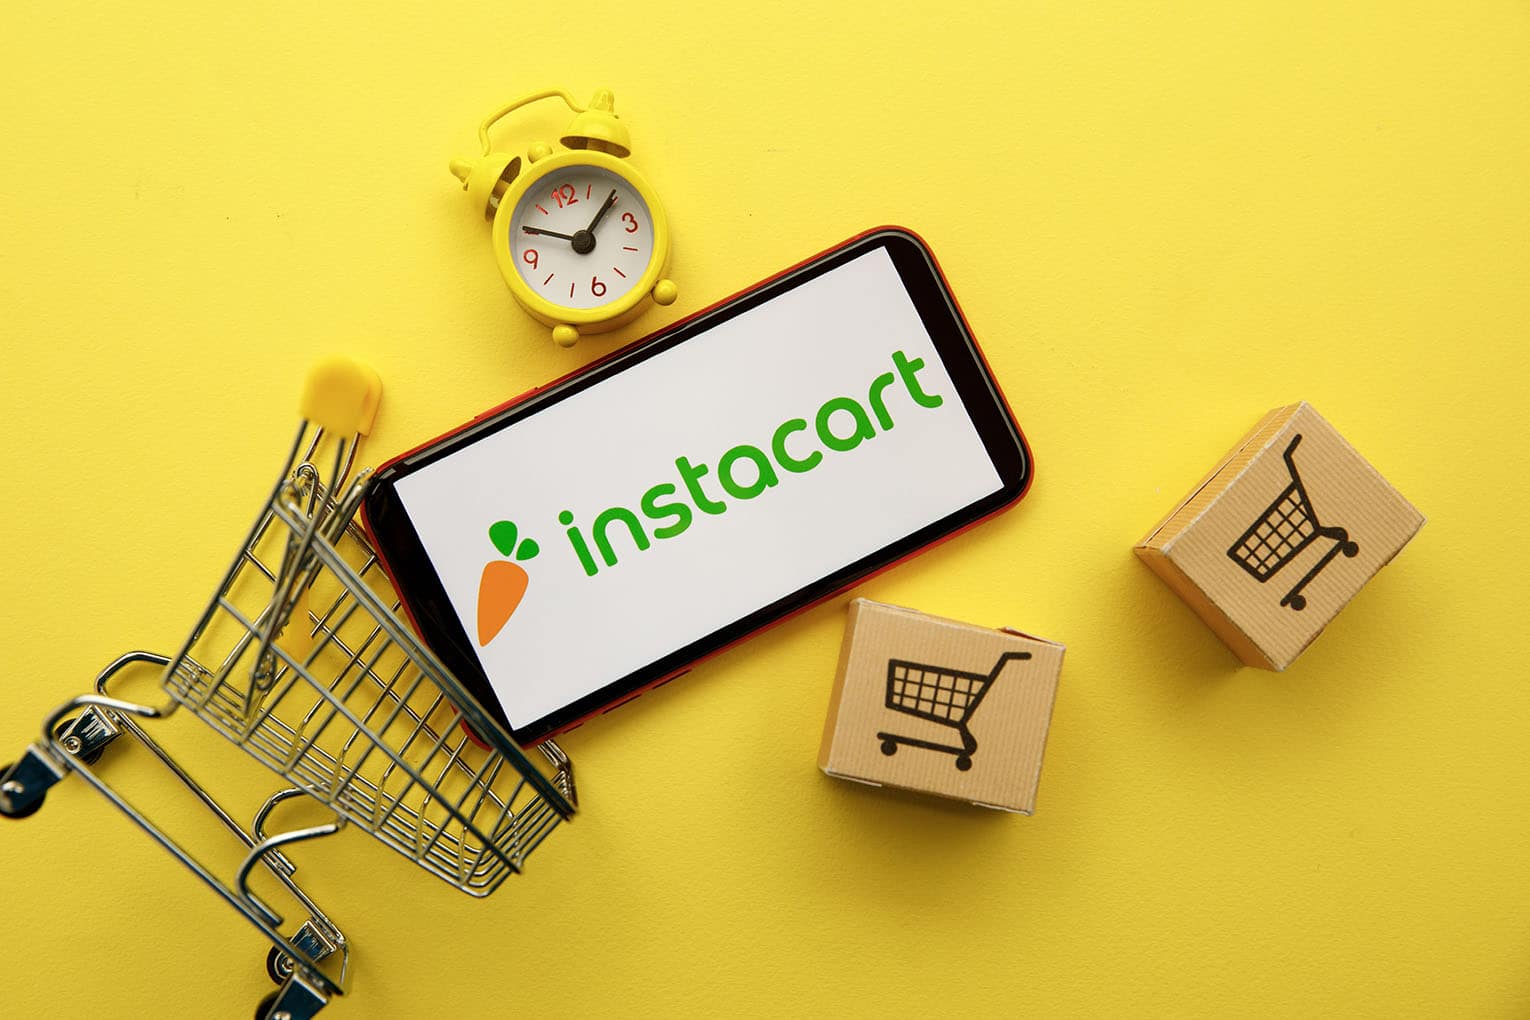 How other brands fund Instacart investments